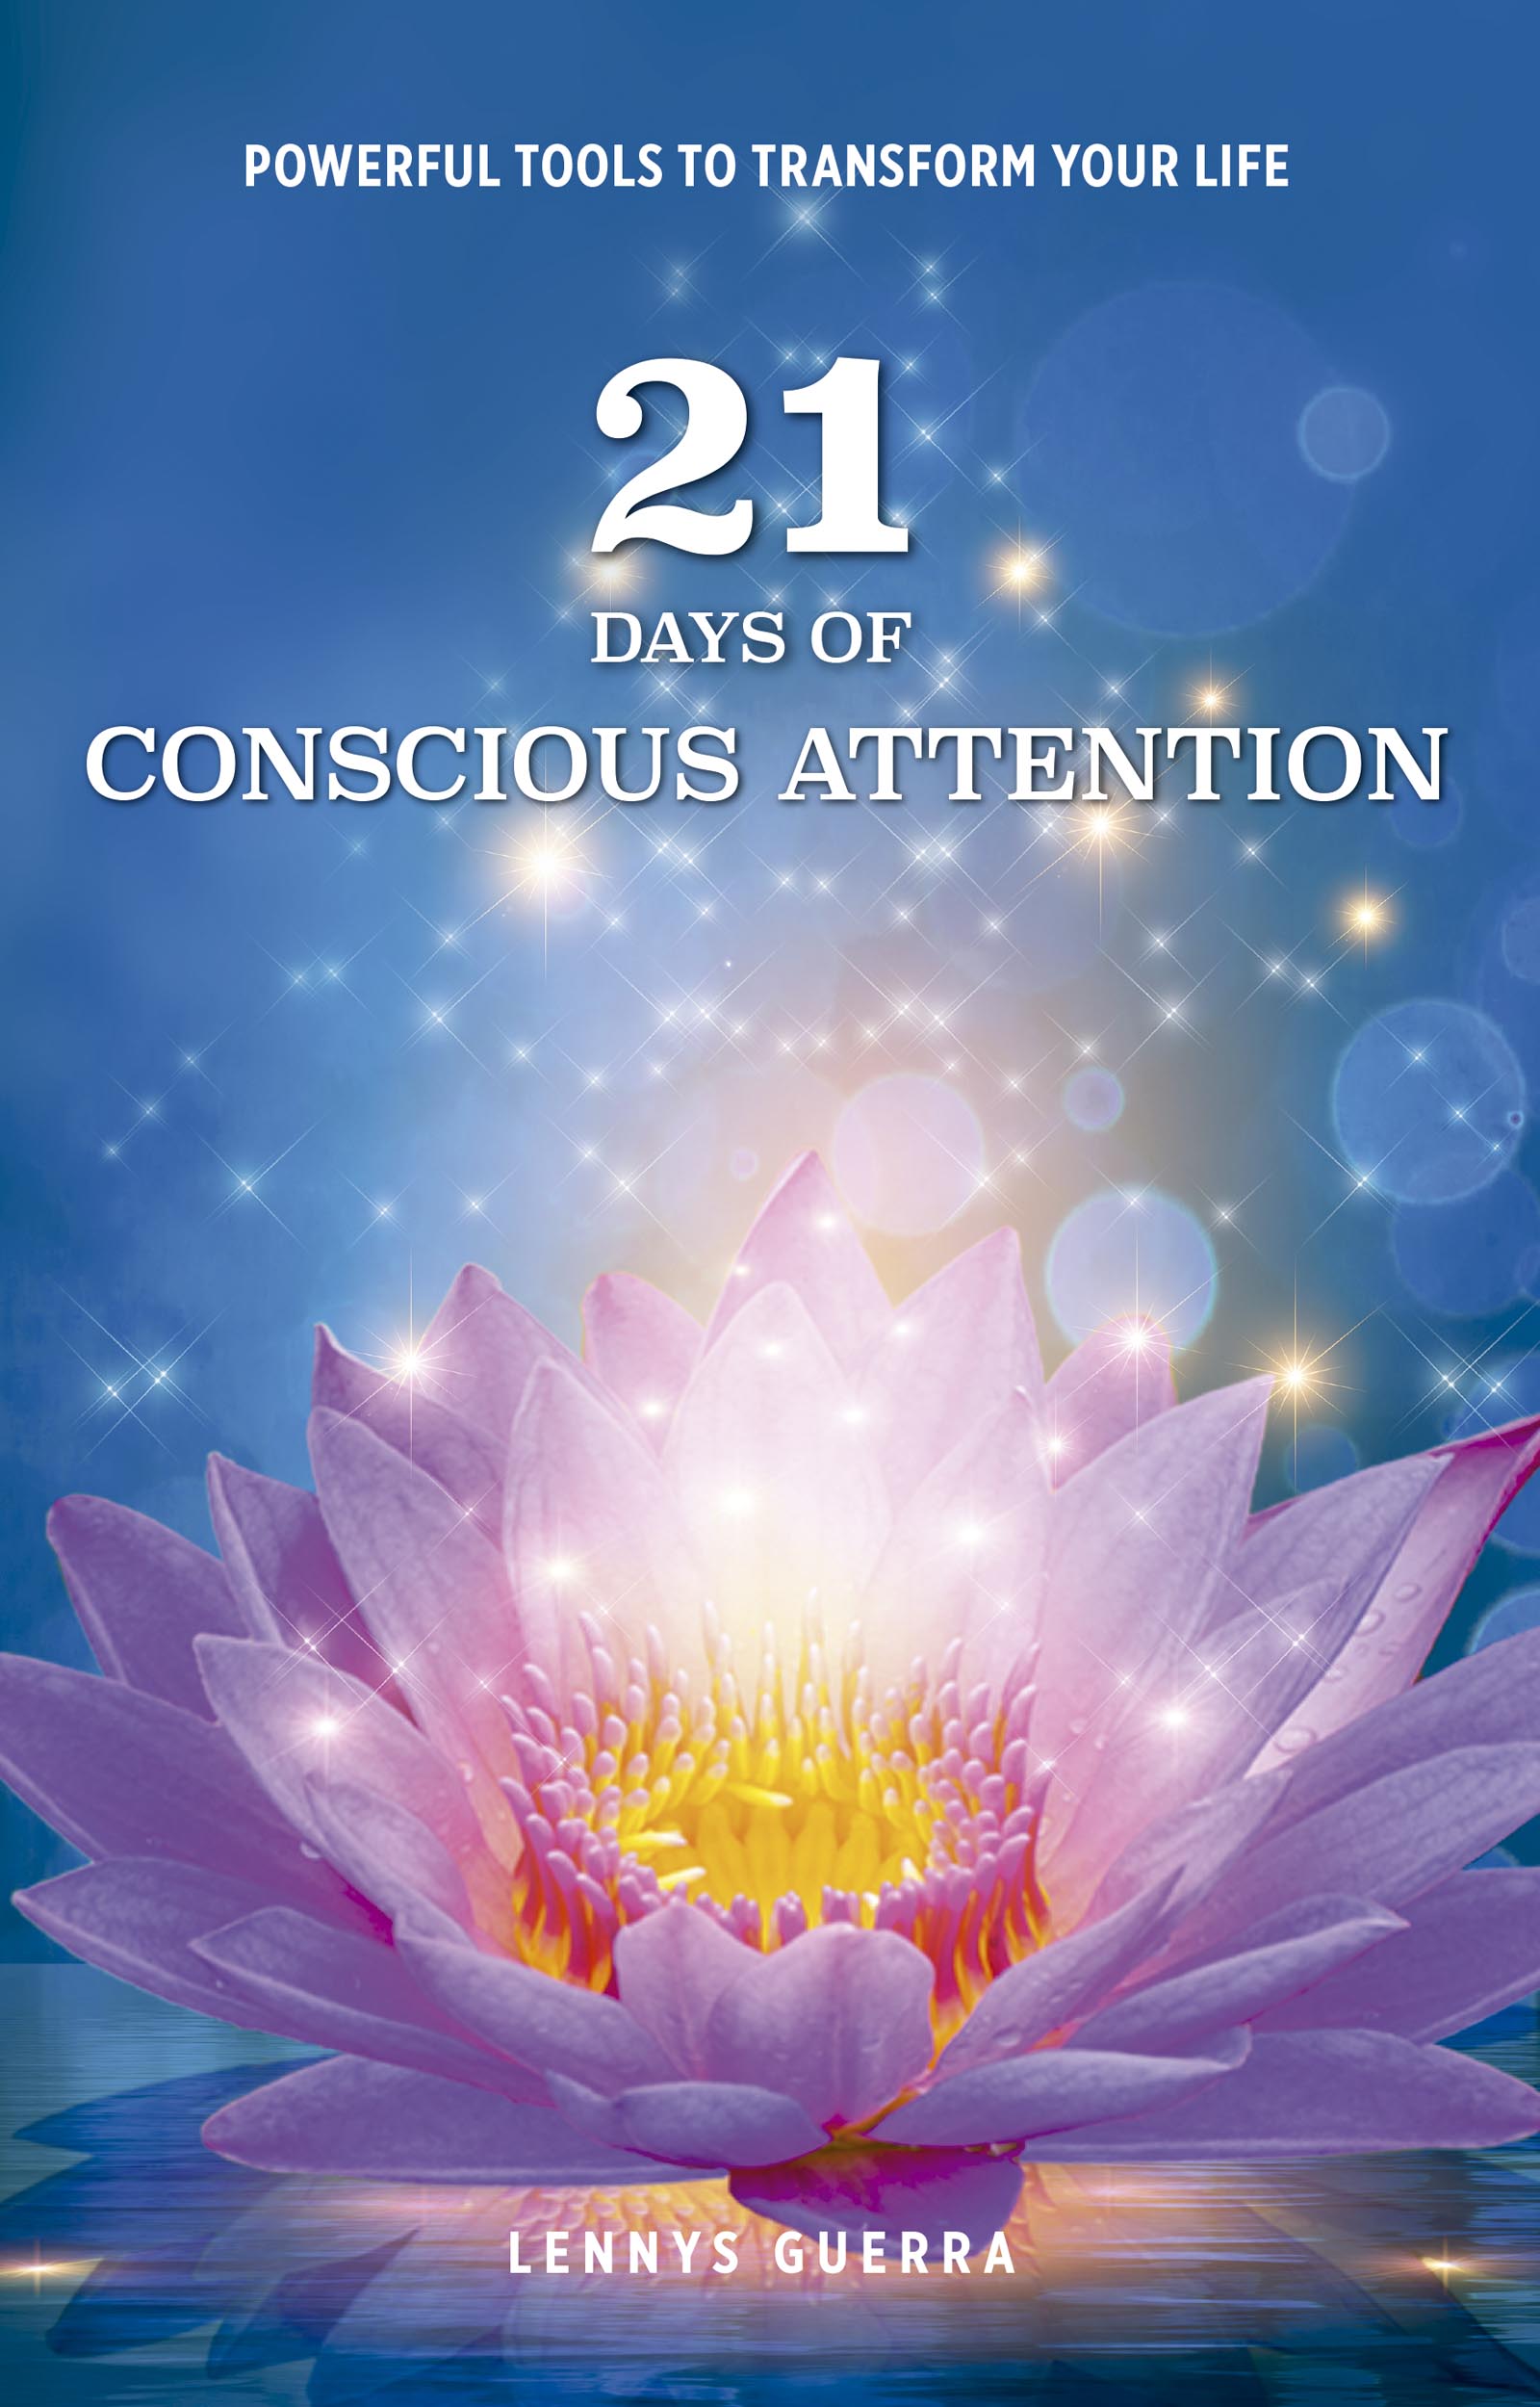 21 DAYS OF CONSCIOUS ATTENTION